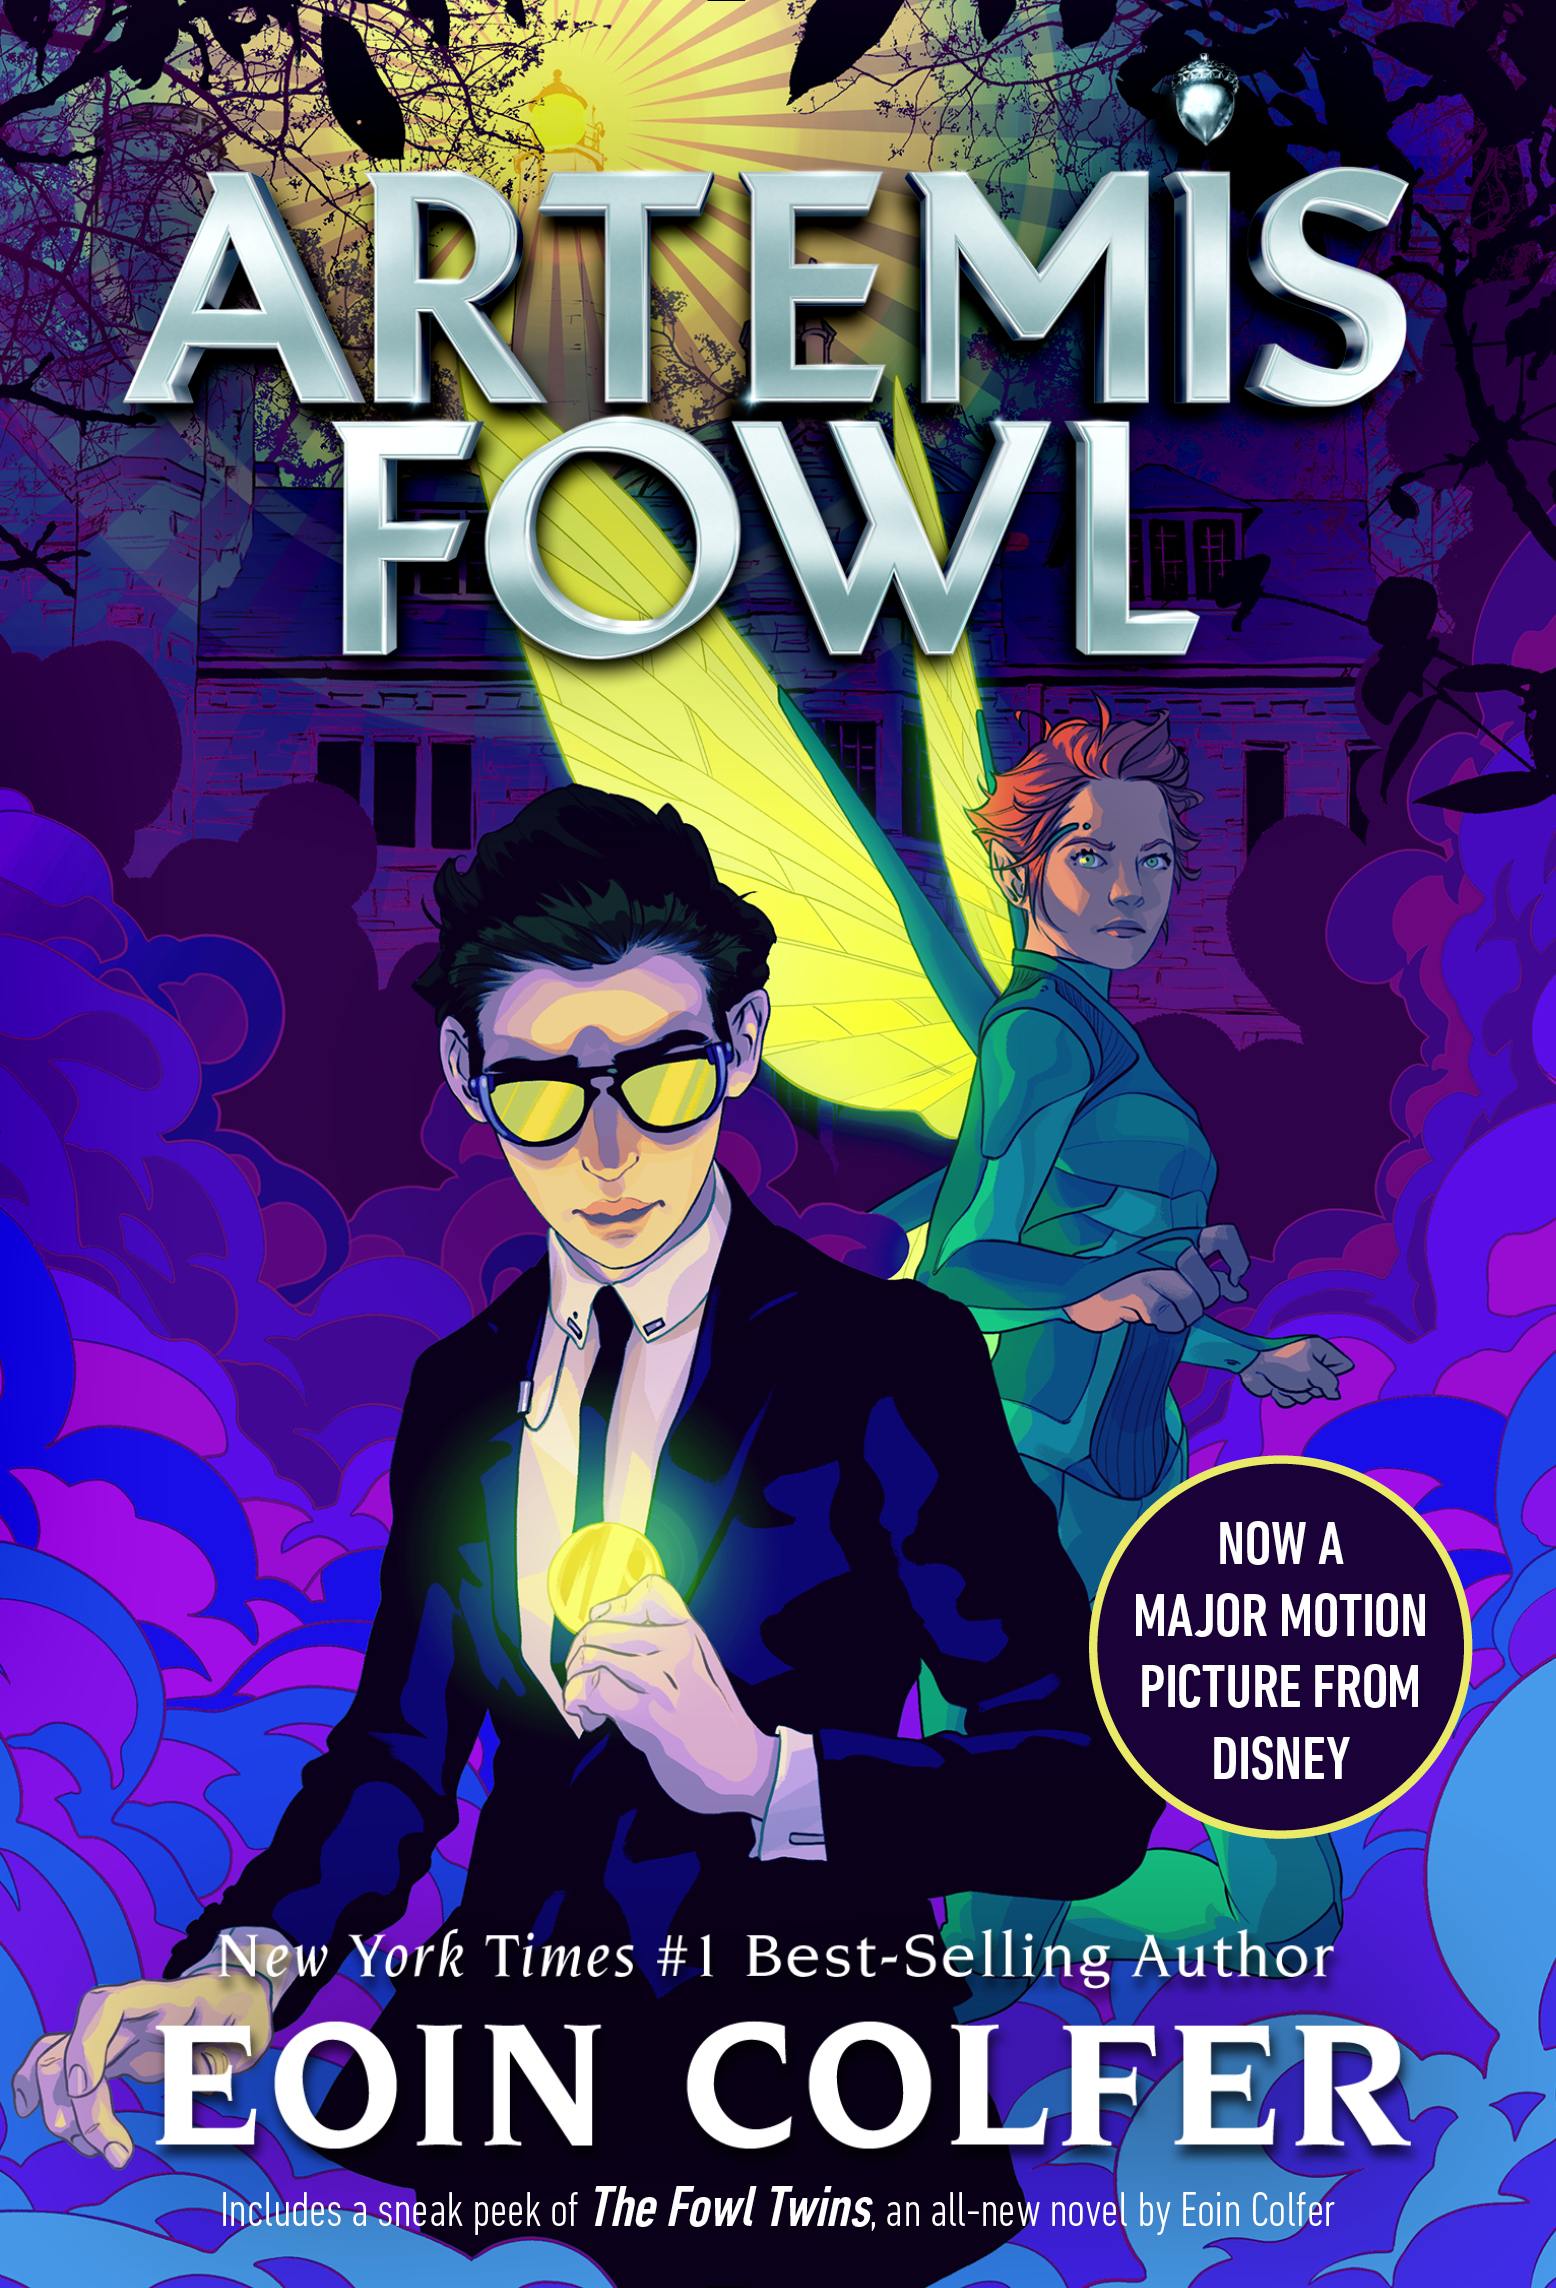 Artemis Fowl and the Atlantis Complex eBook by Eoin Colfer - EPUB Book